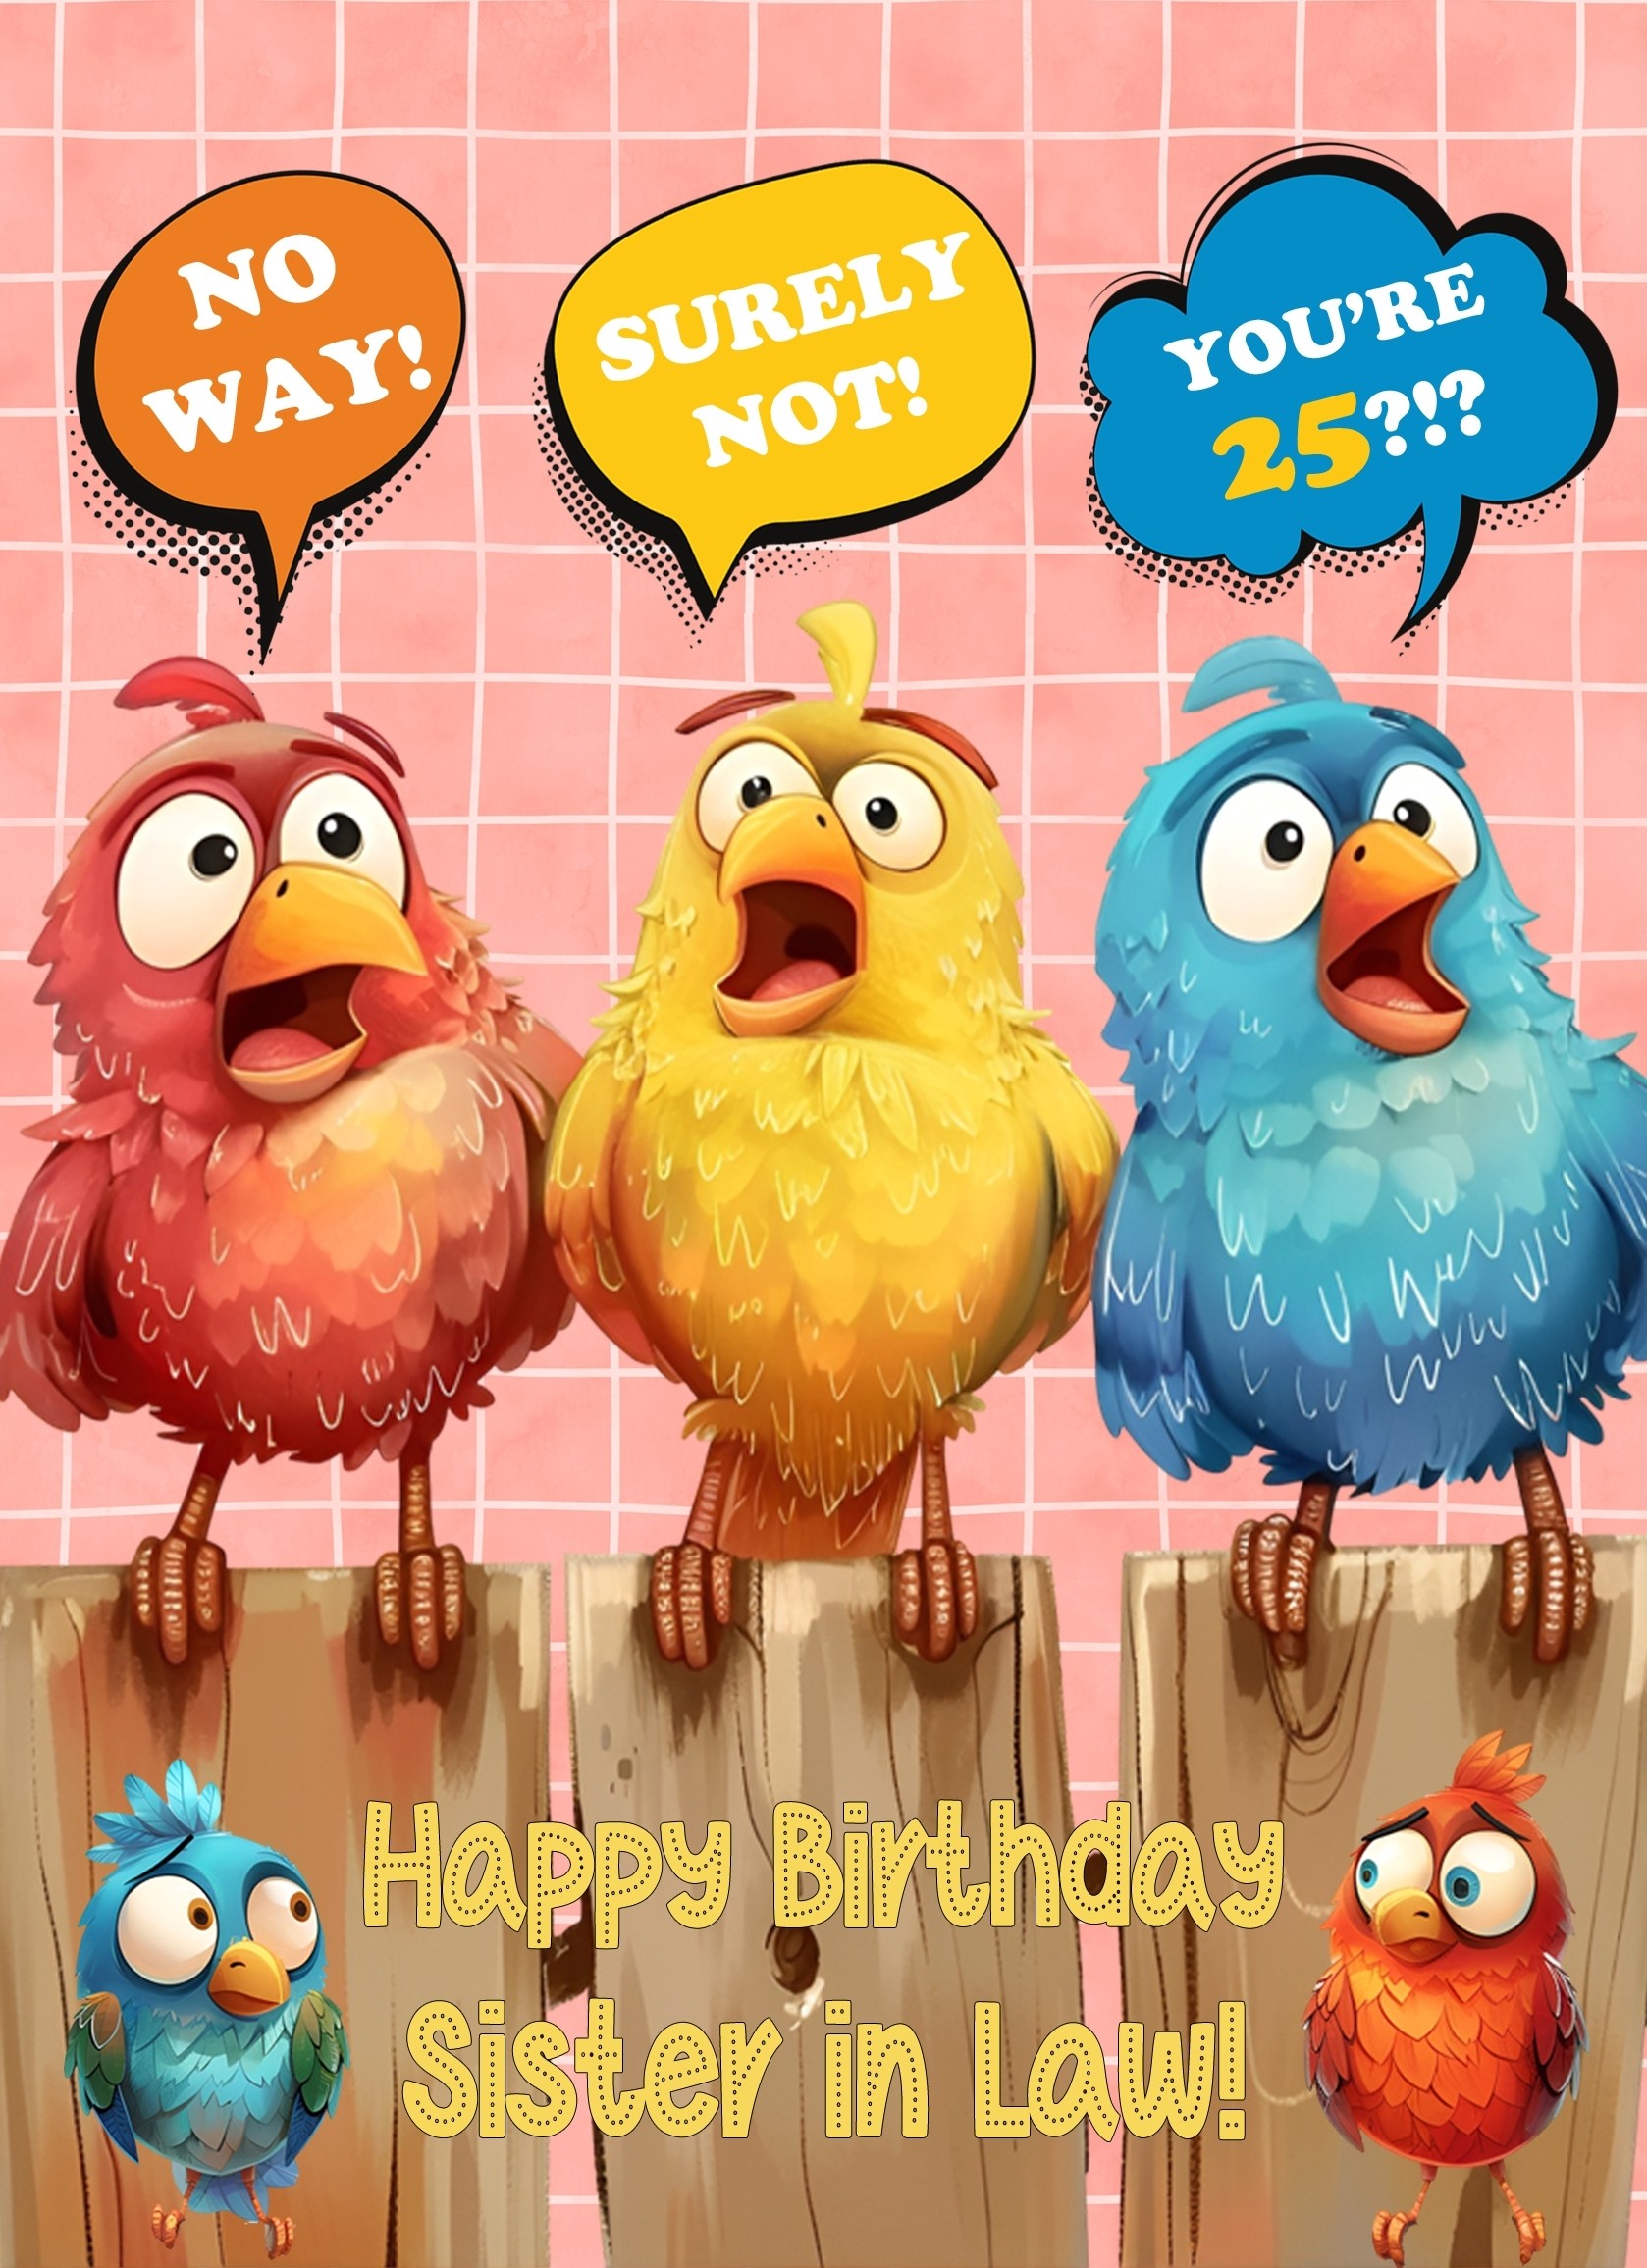 Sister in Law 25th Birthday Card (Funny Birds Surprised)